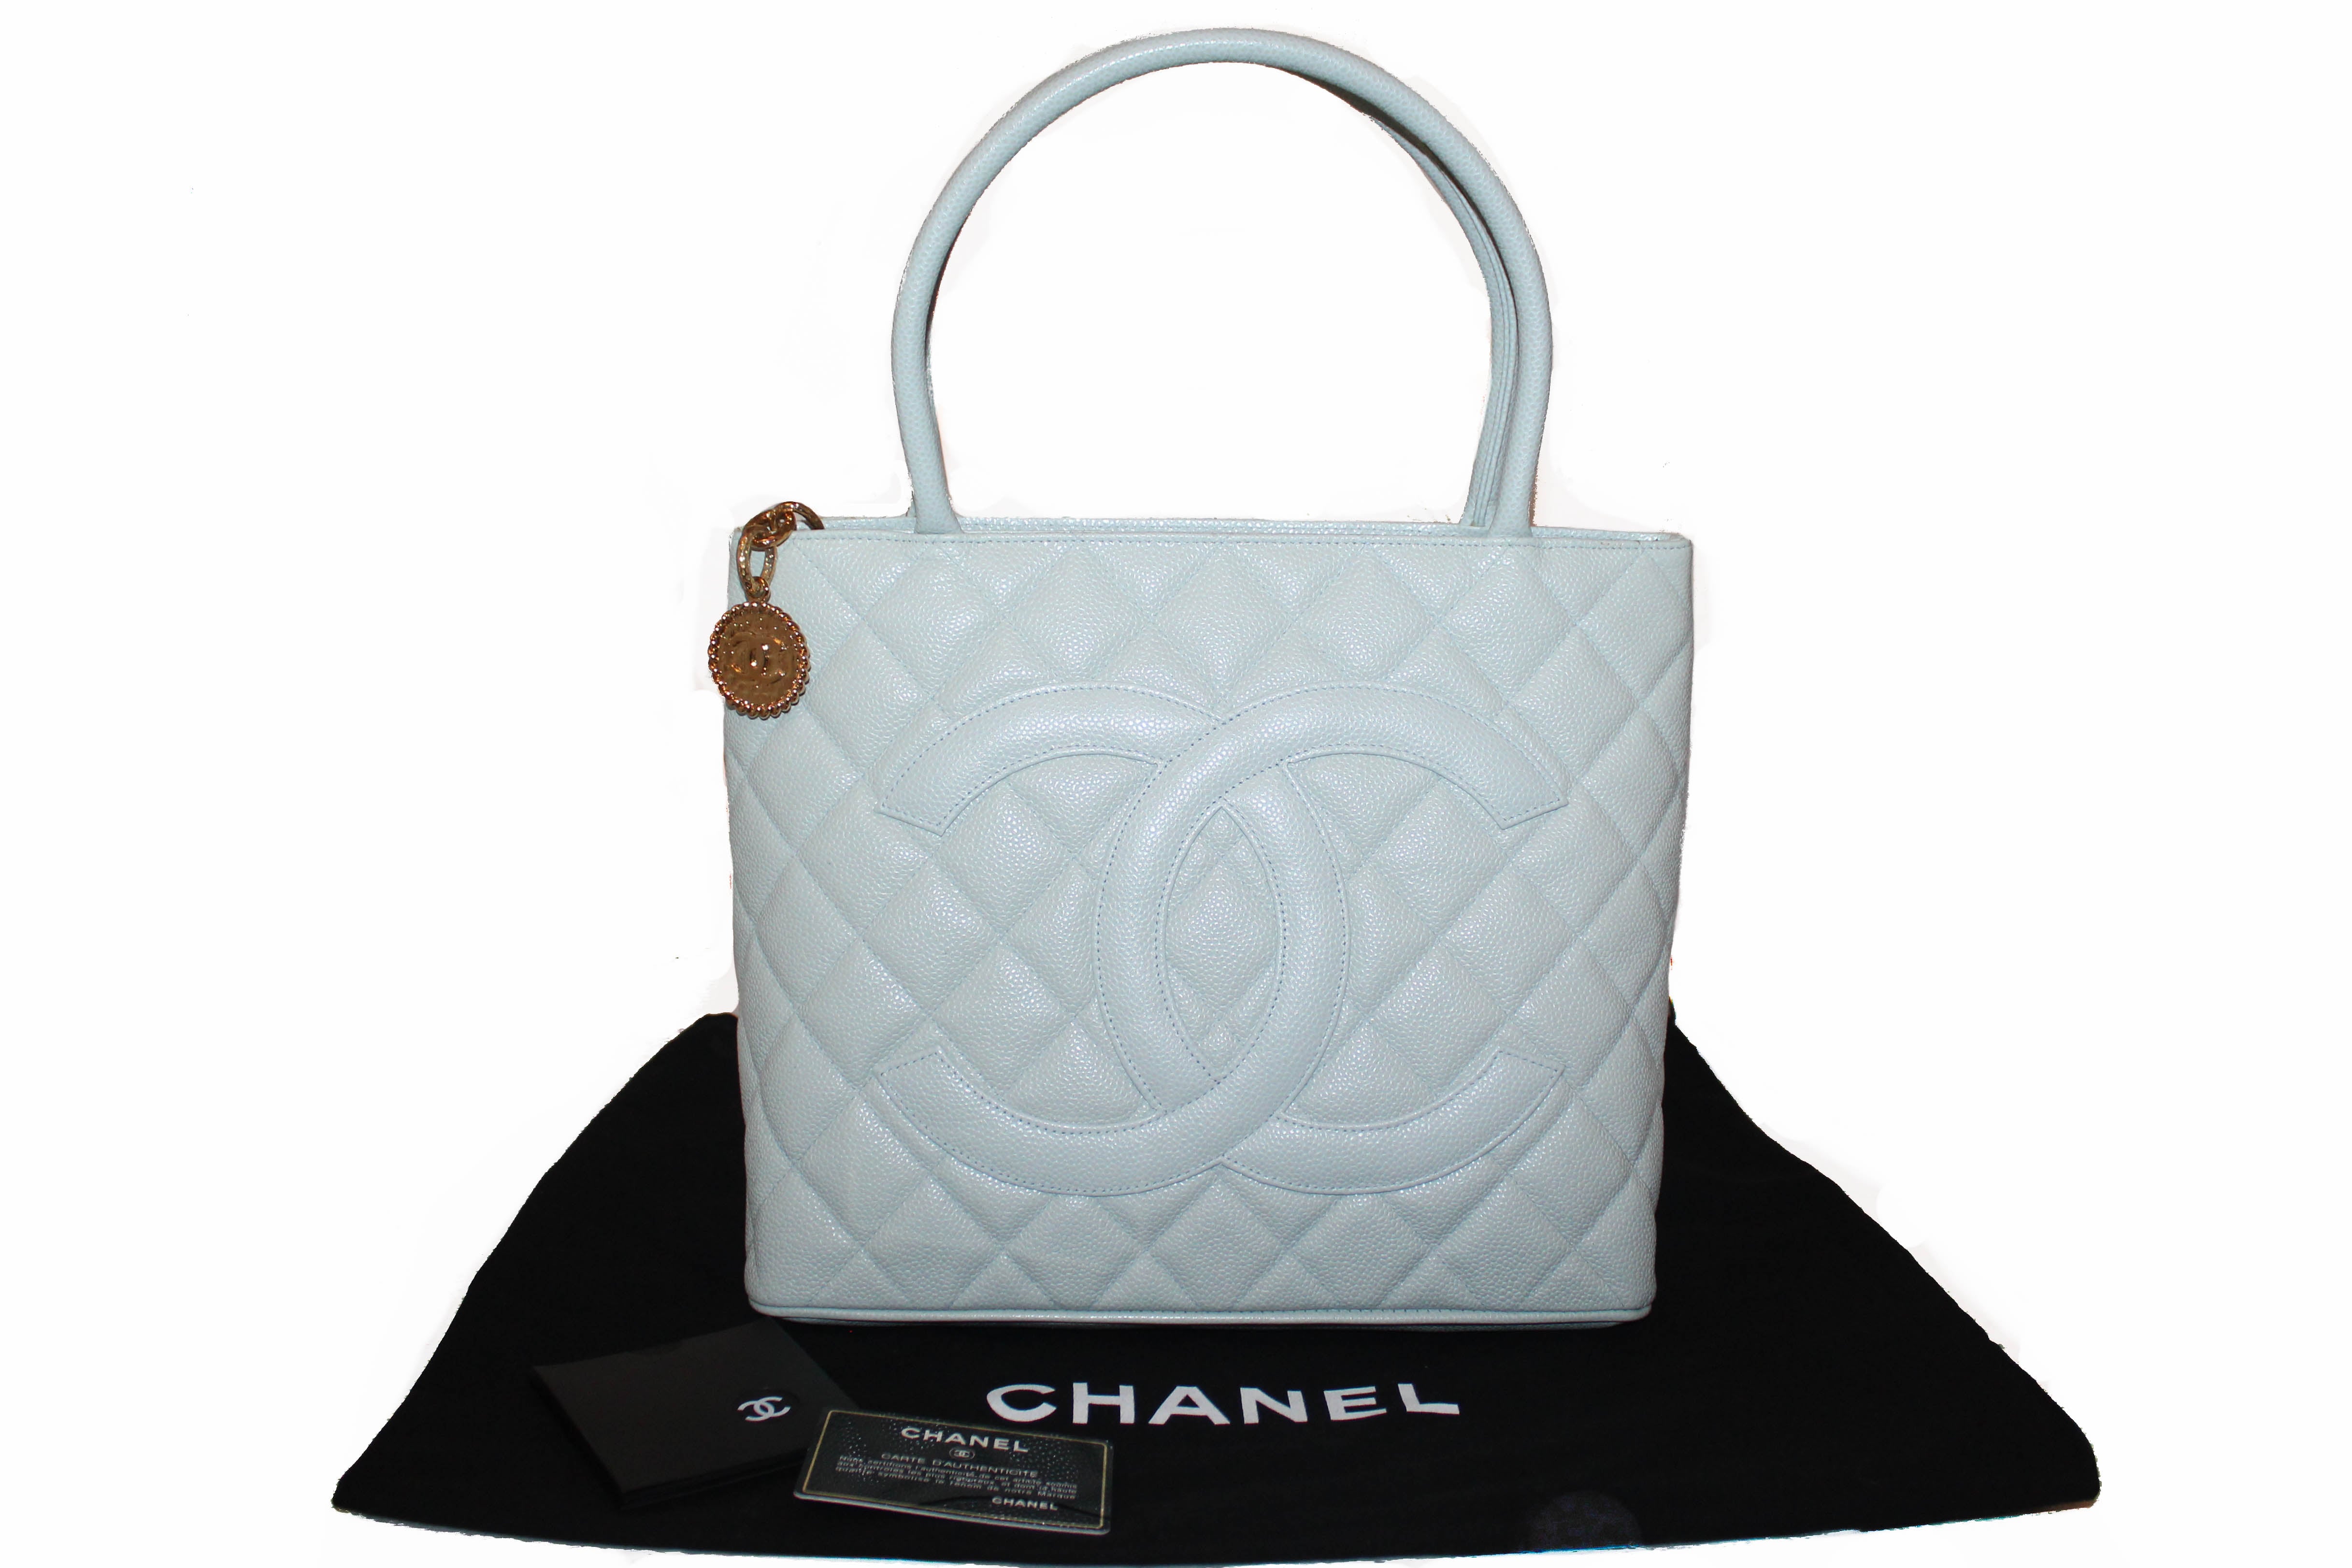 CHANEL, Bags, Soldauthentic Chanel Medallion Tote Bag Black